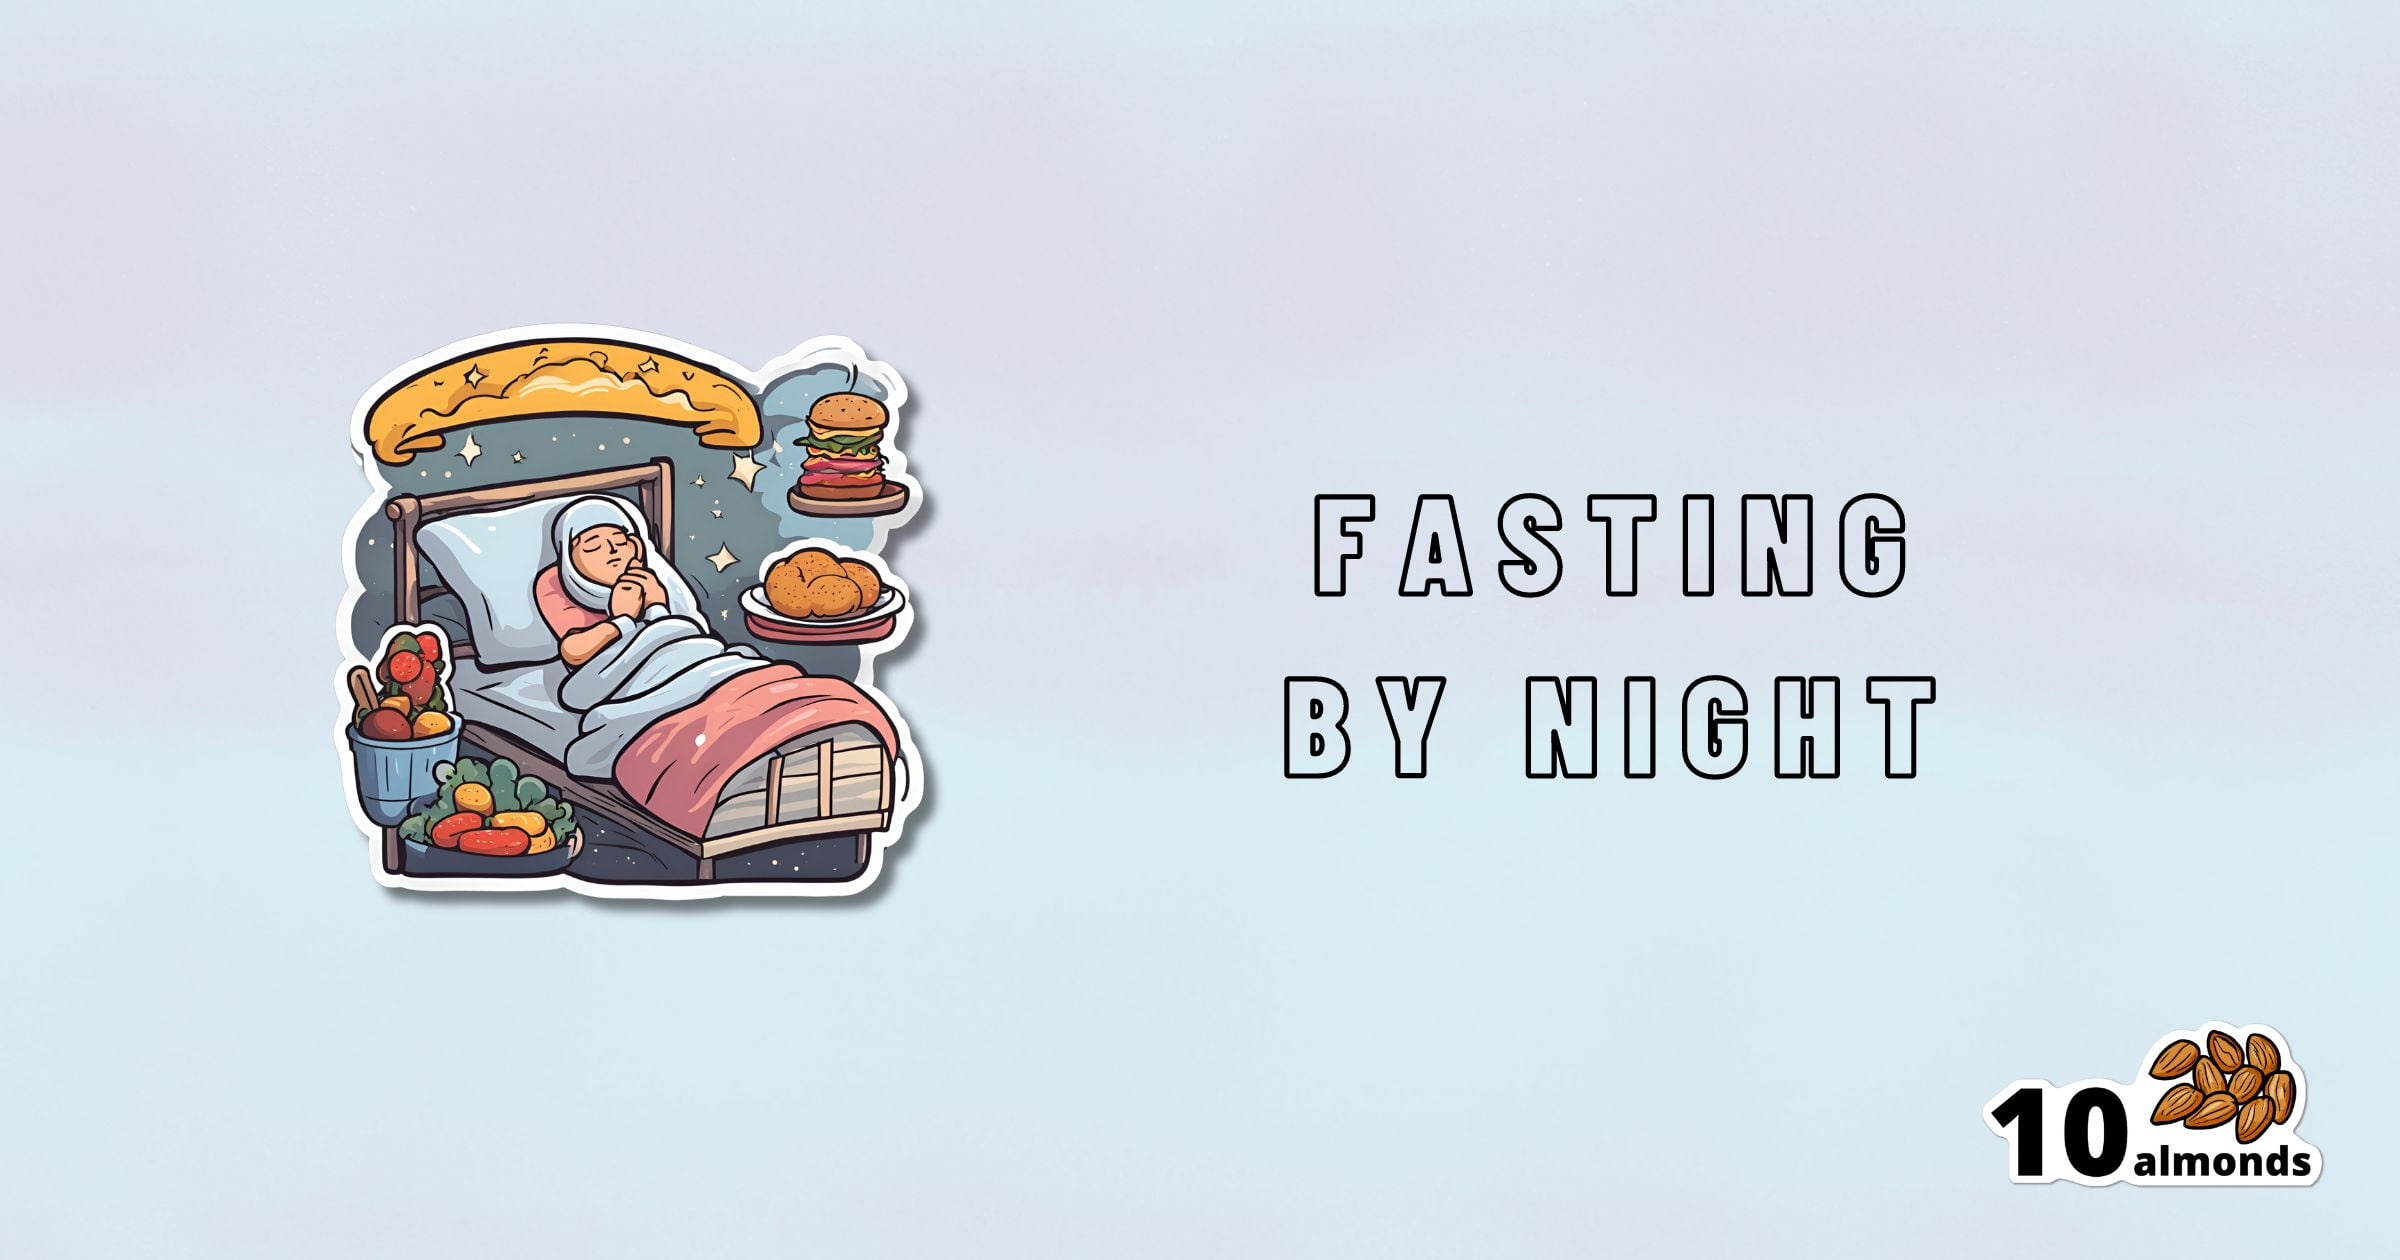 A cartoon depicting a person in bed at night, surrounded by foods. Text on the image reads "Intermittent Fasting by Night" with a small graphic of 10 almonds in the bottom right corner.